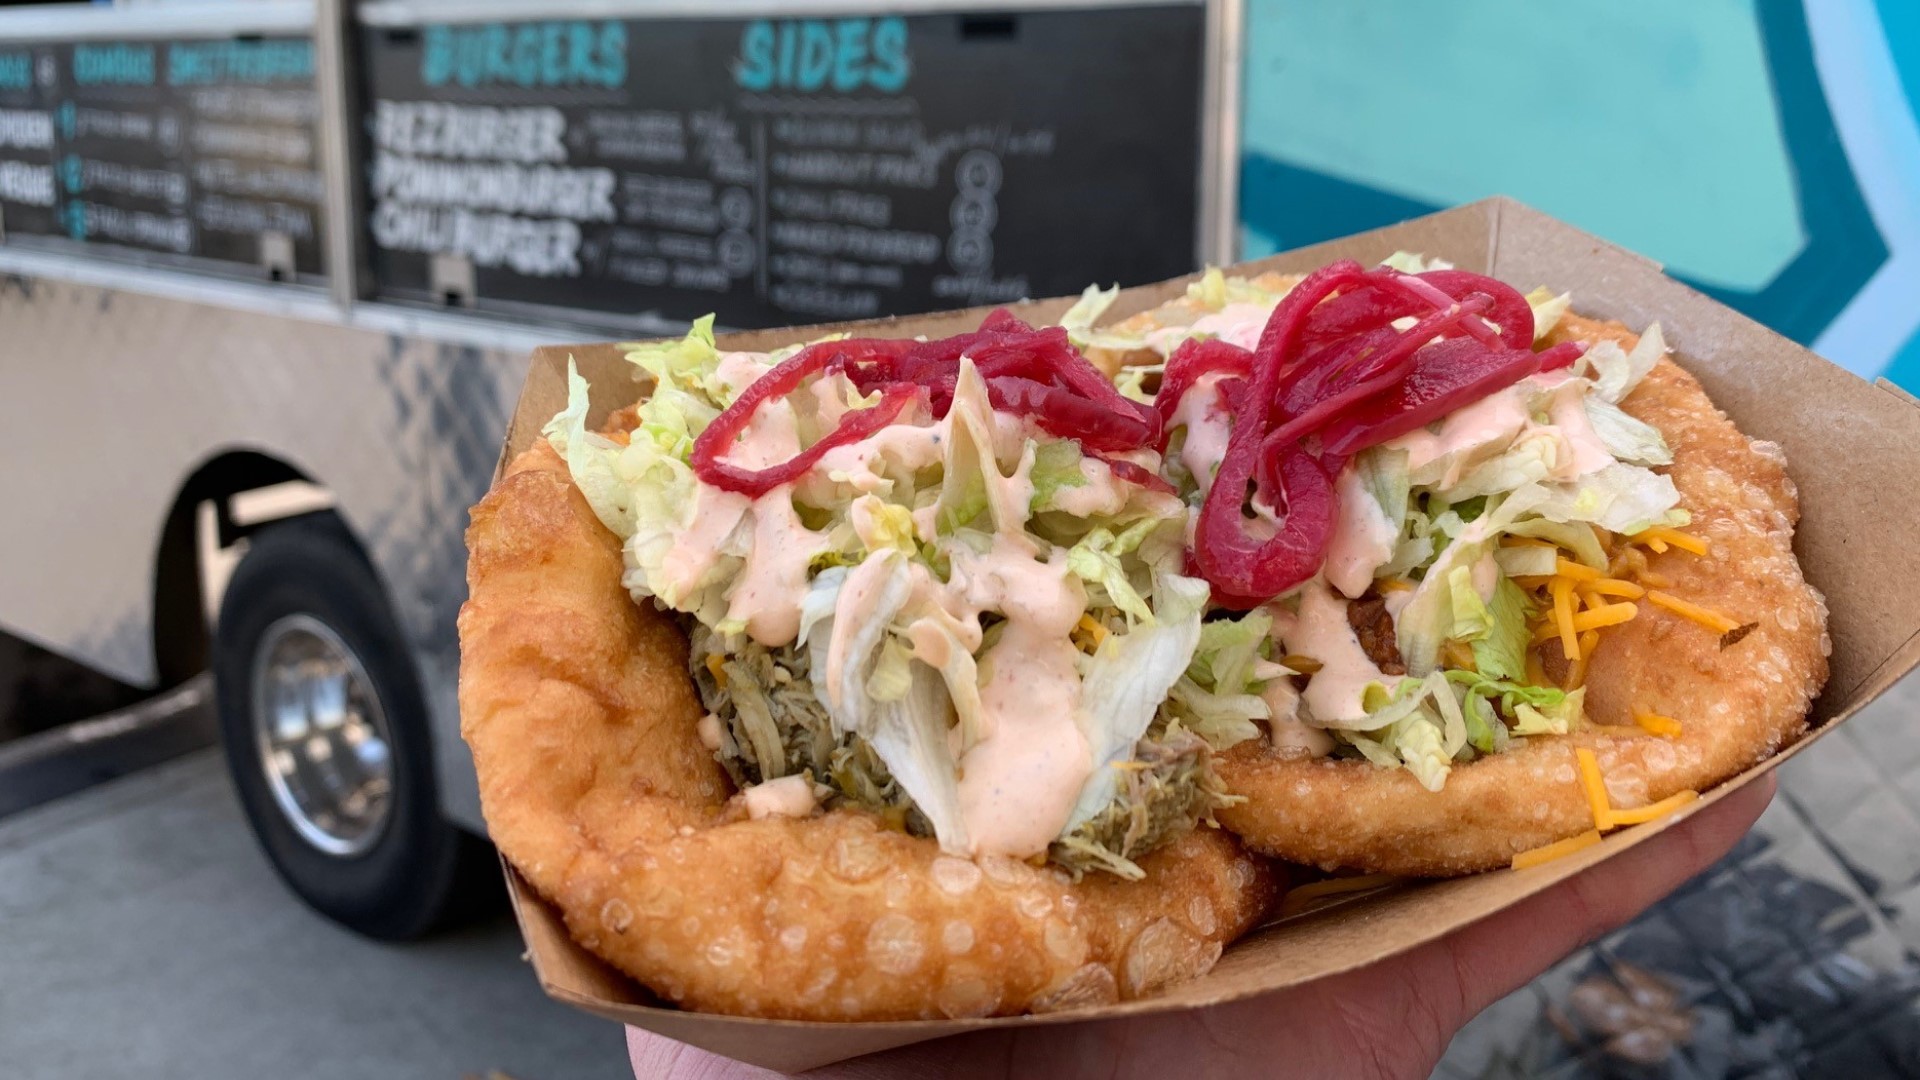 Off the Rez food truck brings the glory of frybread to Seattle streets- while also sharing the owner's culture. 😋 #k5evening